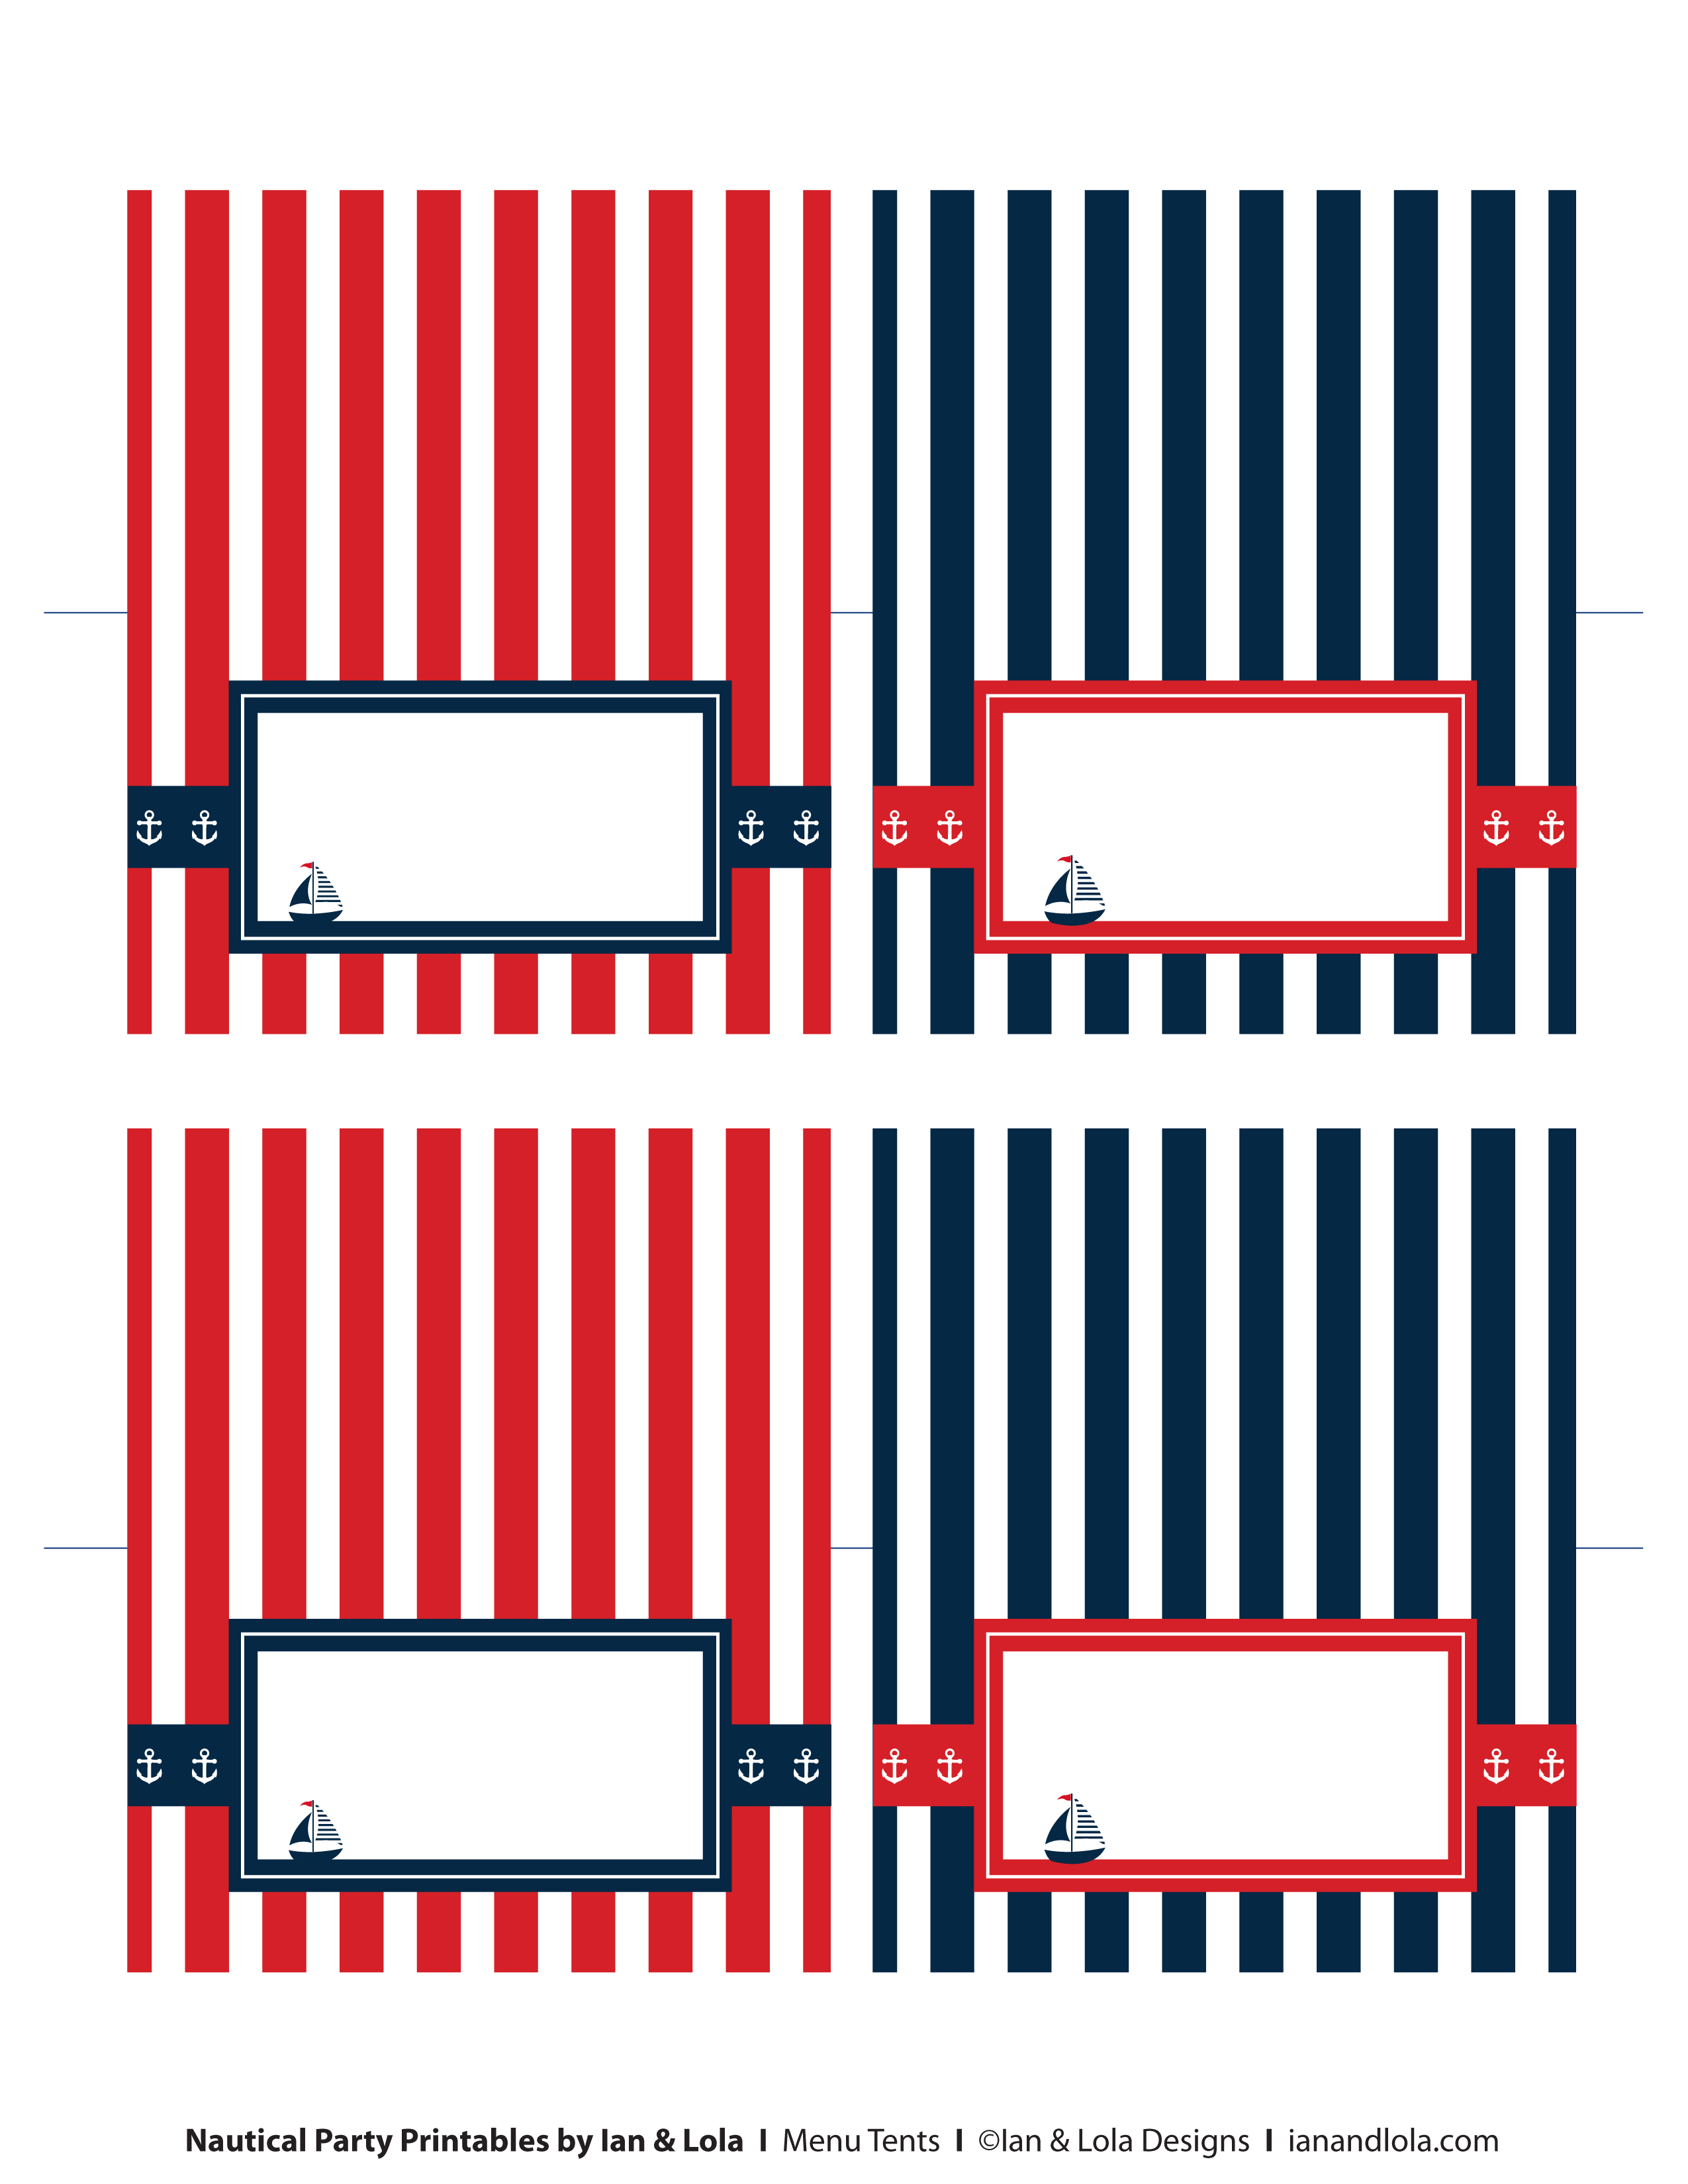 Free Nautical Party Printables From Ian & Lola Designs Pertaining To Nautical Banner Template